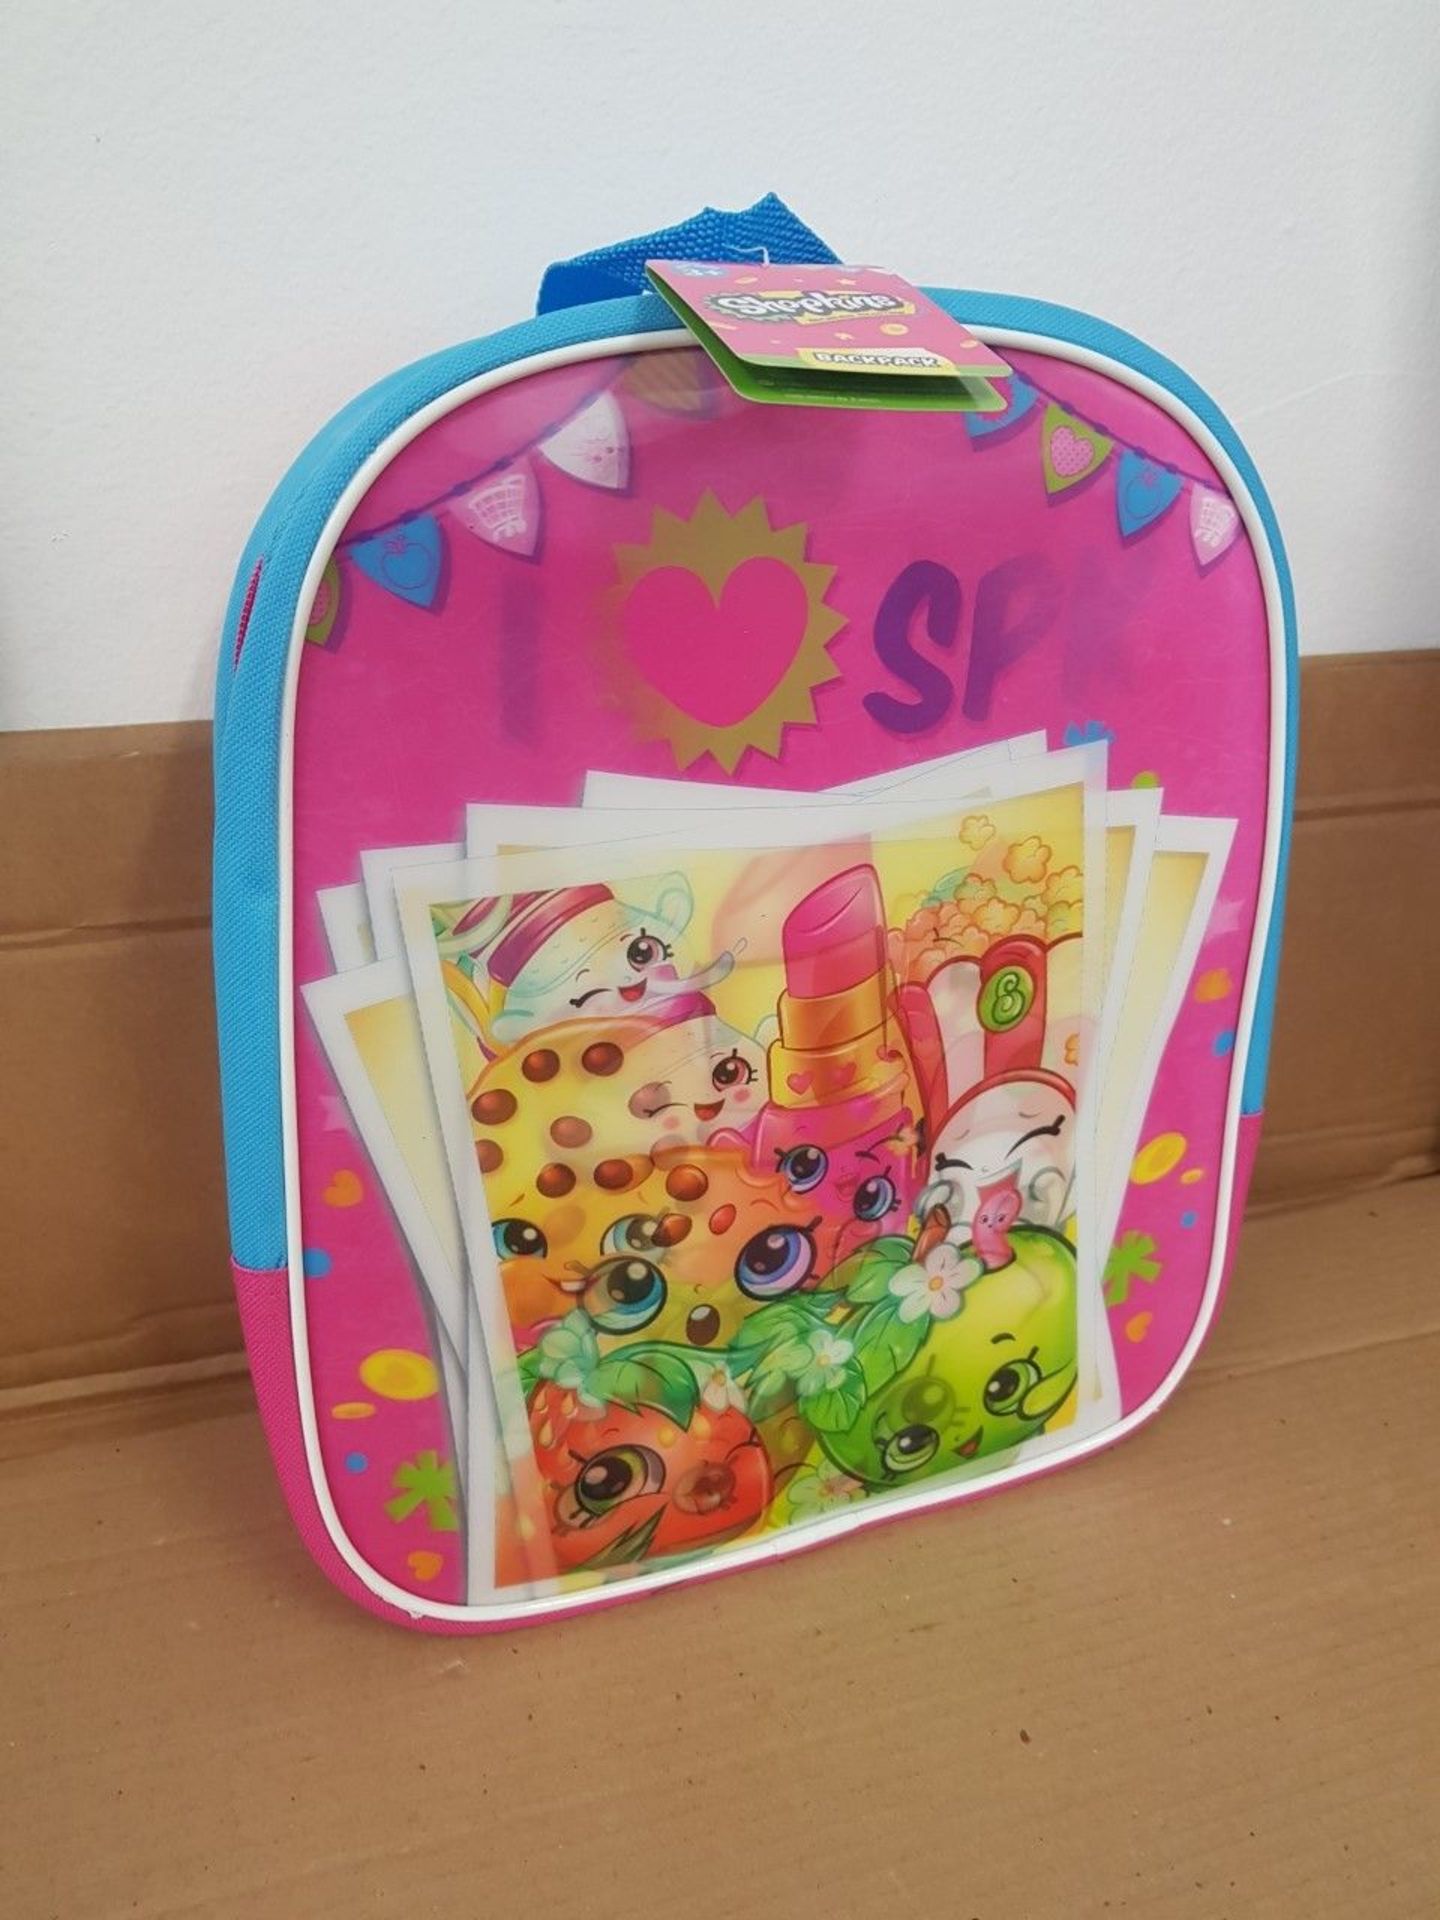 12 x BRAND NEW SHOPKINS LENTICULAR BACK PACKS. ORIGINAL RRP £12 EACH, GIVING THIS LOT A TOTAL - Image 4 of 4